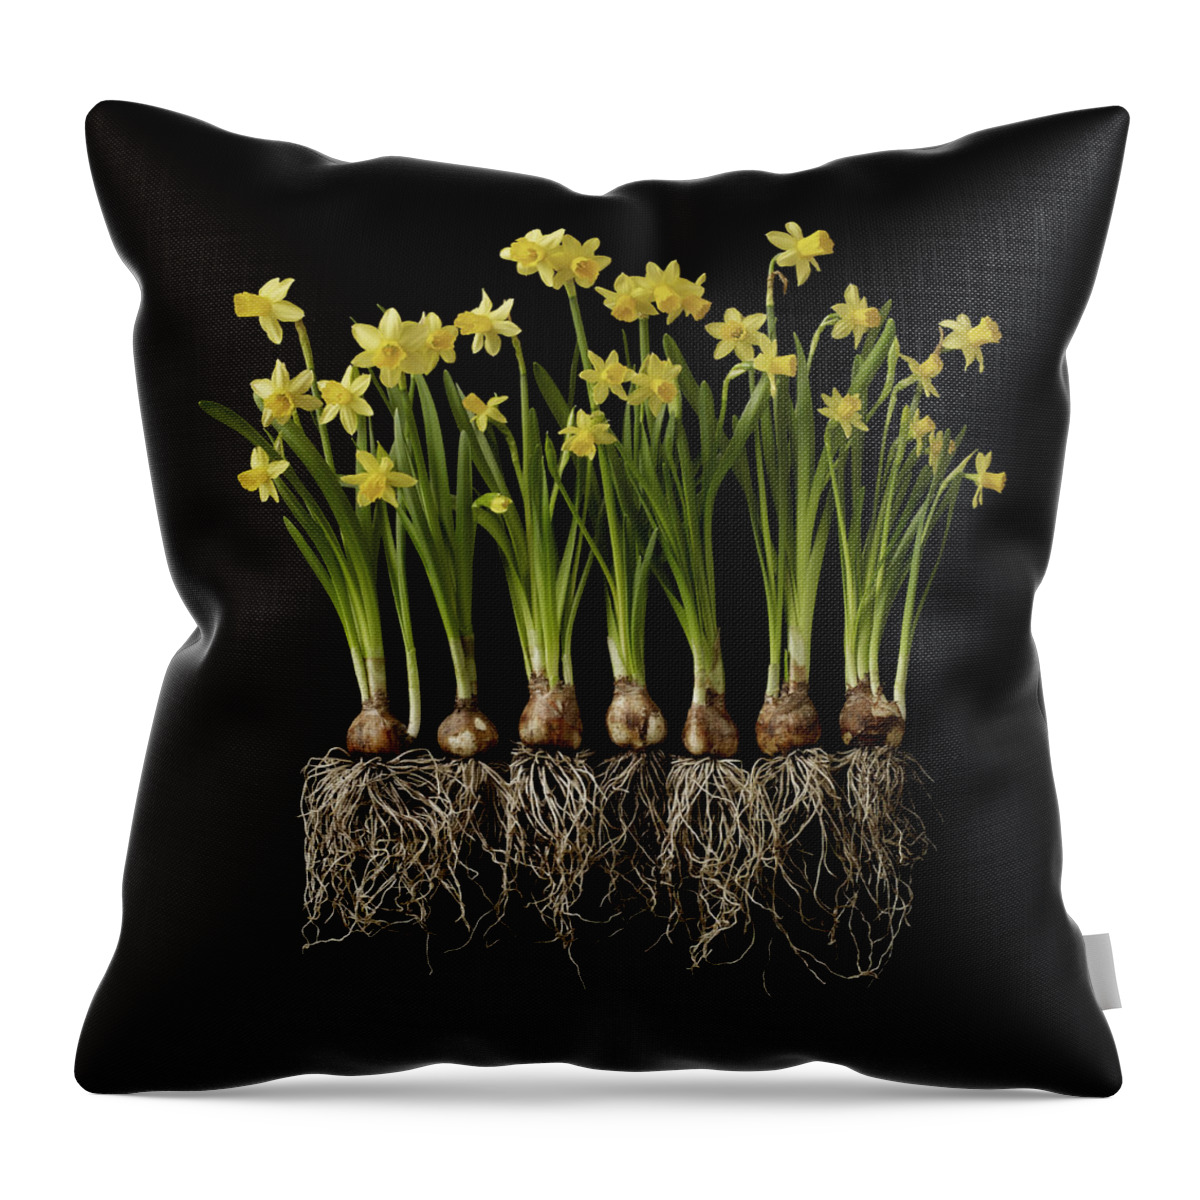 In A Row Throw Pillow featuring the photograph Daffodil Plants On Black Background by William Turner